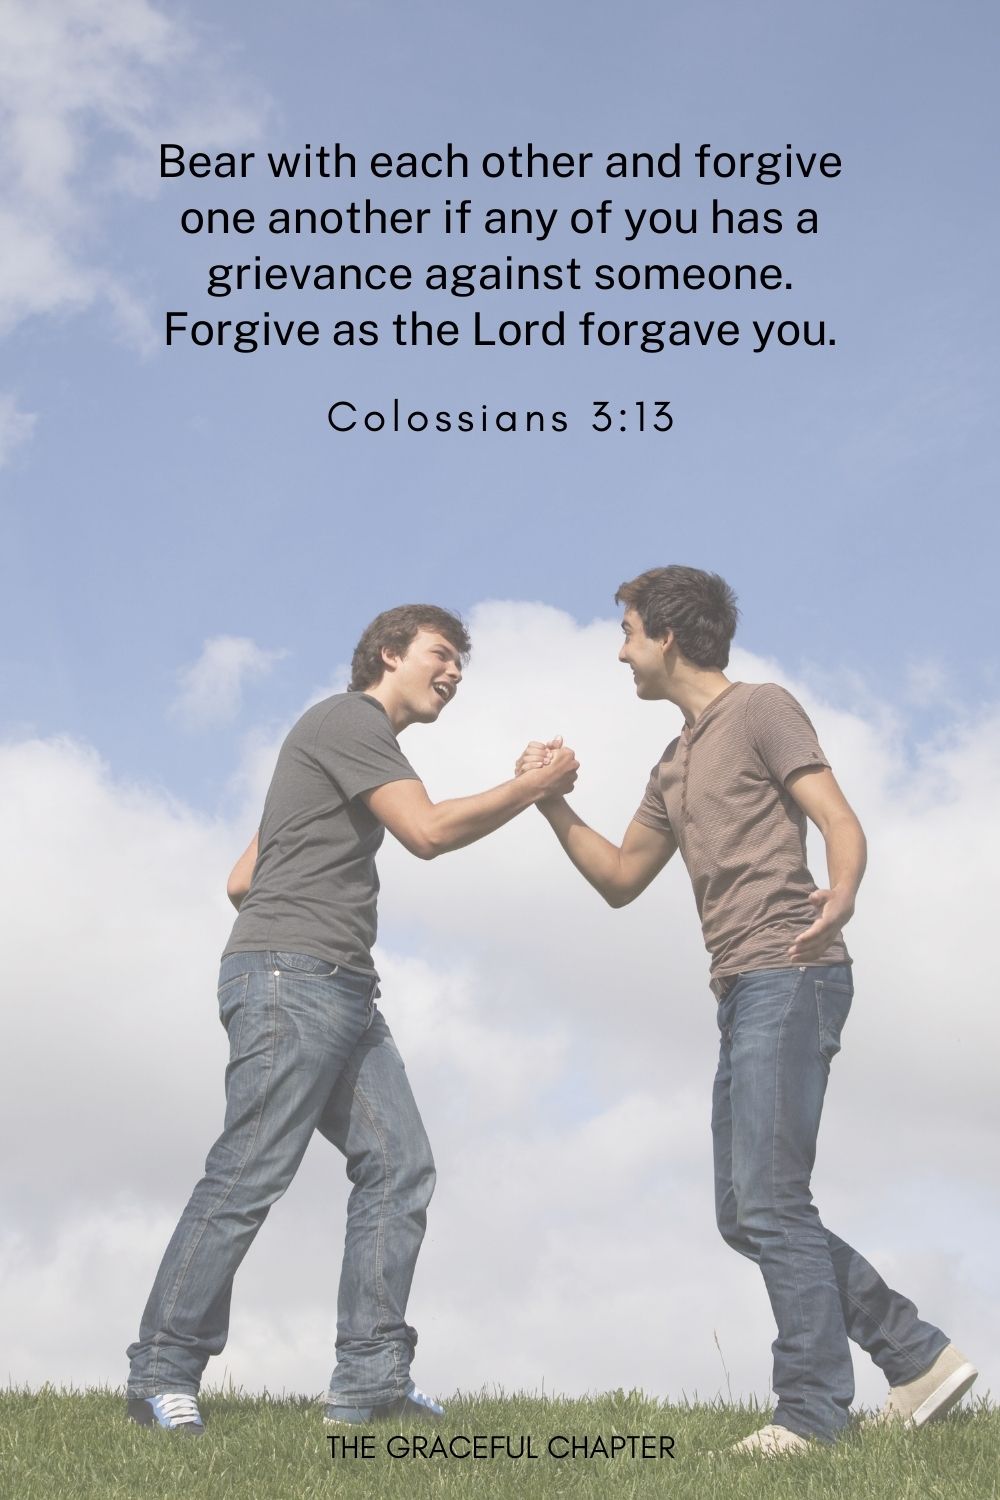 Bear with each other and forgive one another if any of you has a grievance against someone. Forgive as the Lord forgave you.
Colossians 3:13